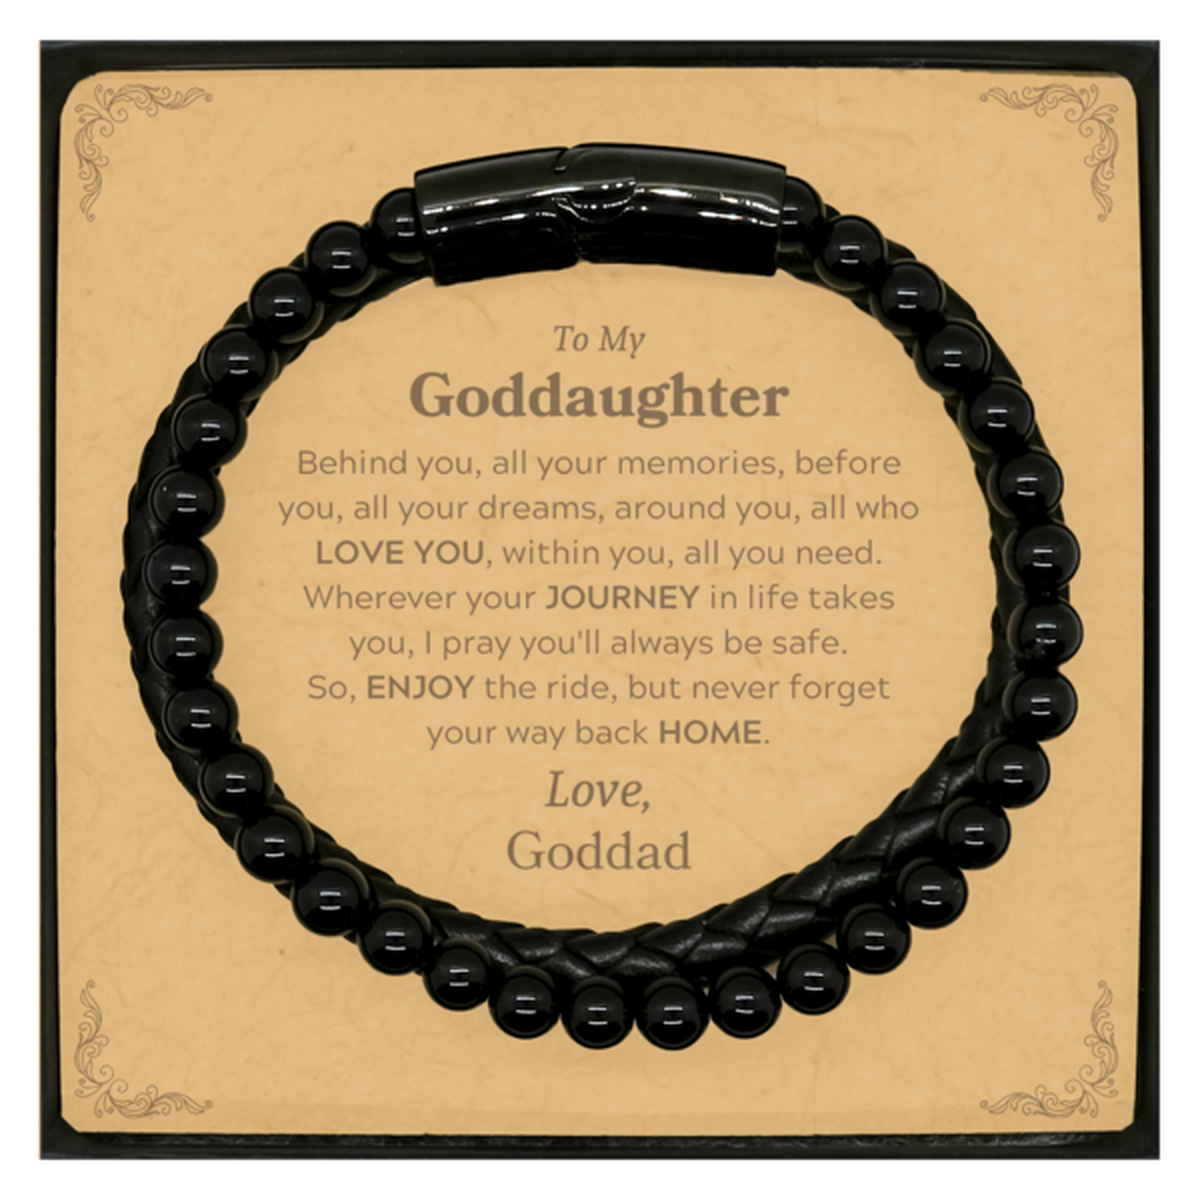 To My Goddaughter Graduation Gifts from Goddad, Goddaughter Stone Leather Bracelets Christmas Birthday Gifts for Goddaughter Behind you, all your memories, before you, all your dreams. Love, Goddad